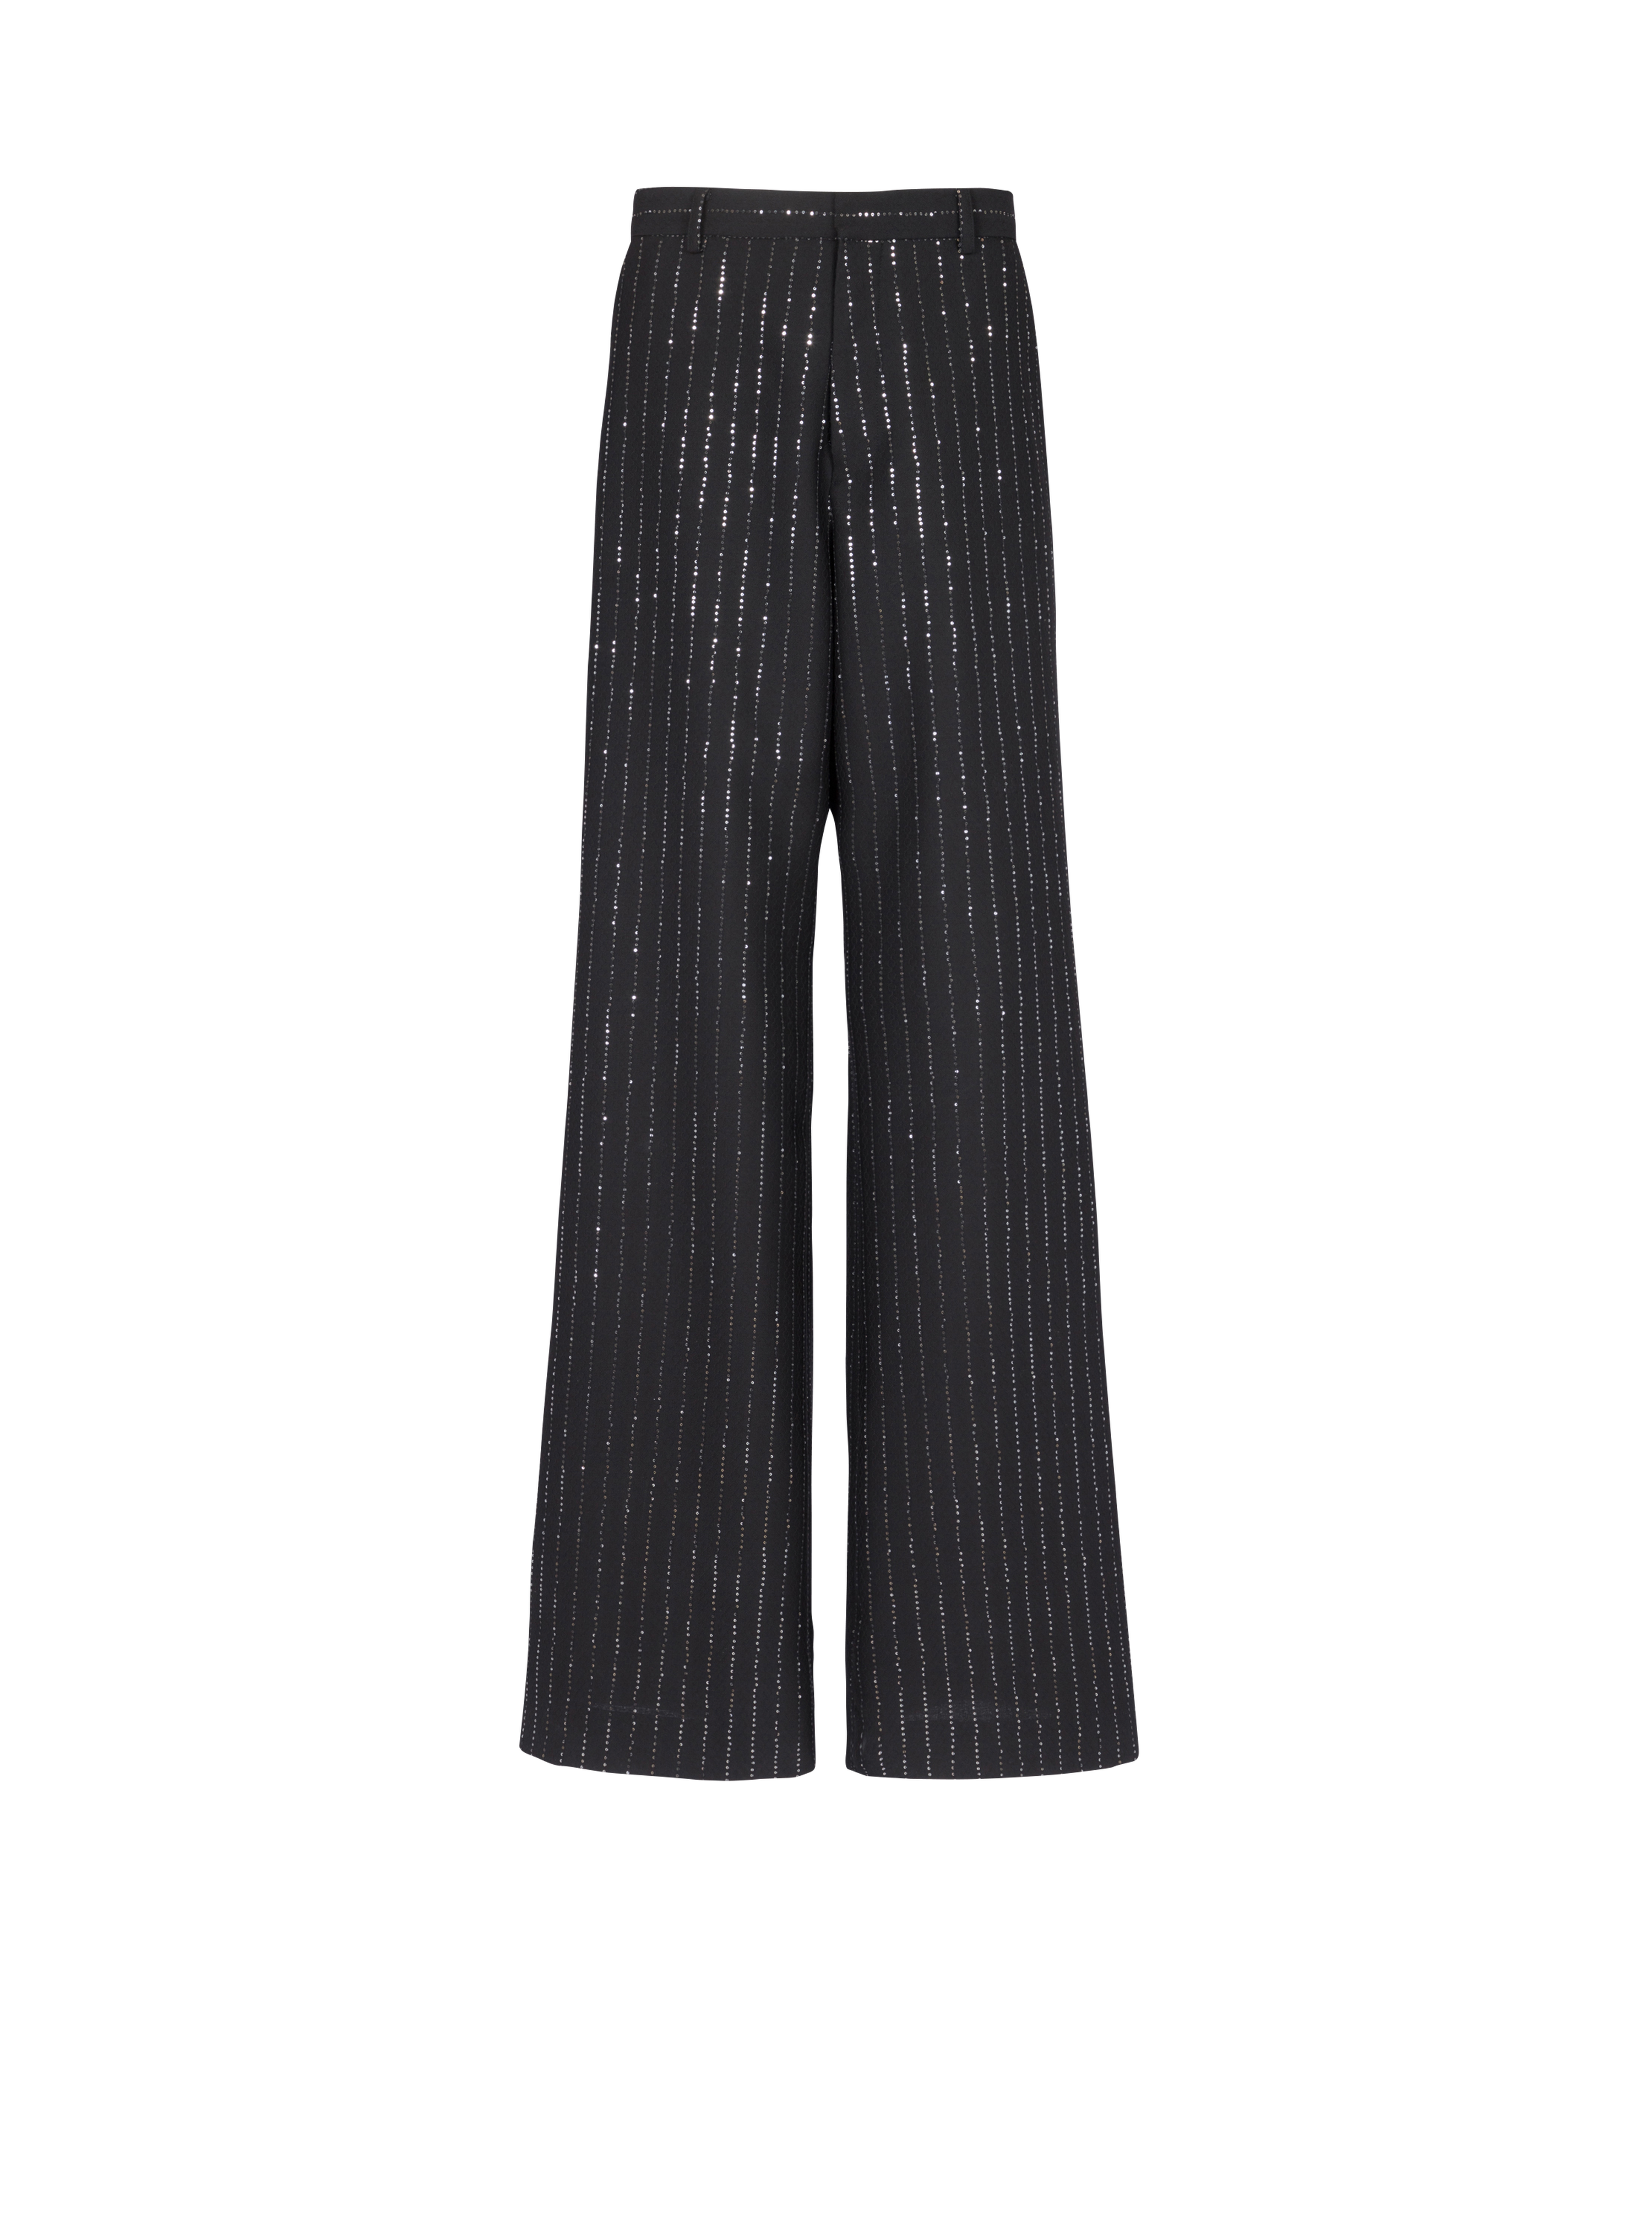 Trousers with sequin stripes, black